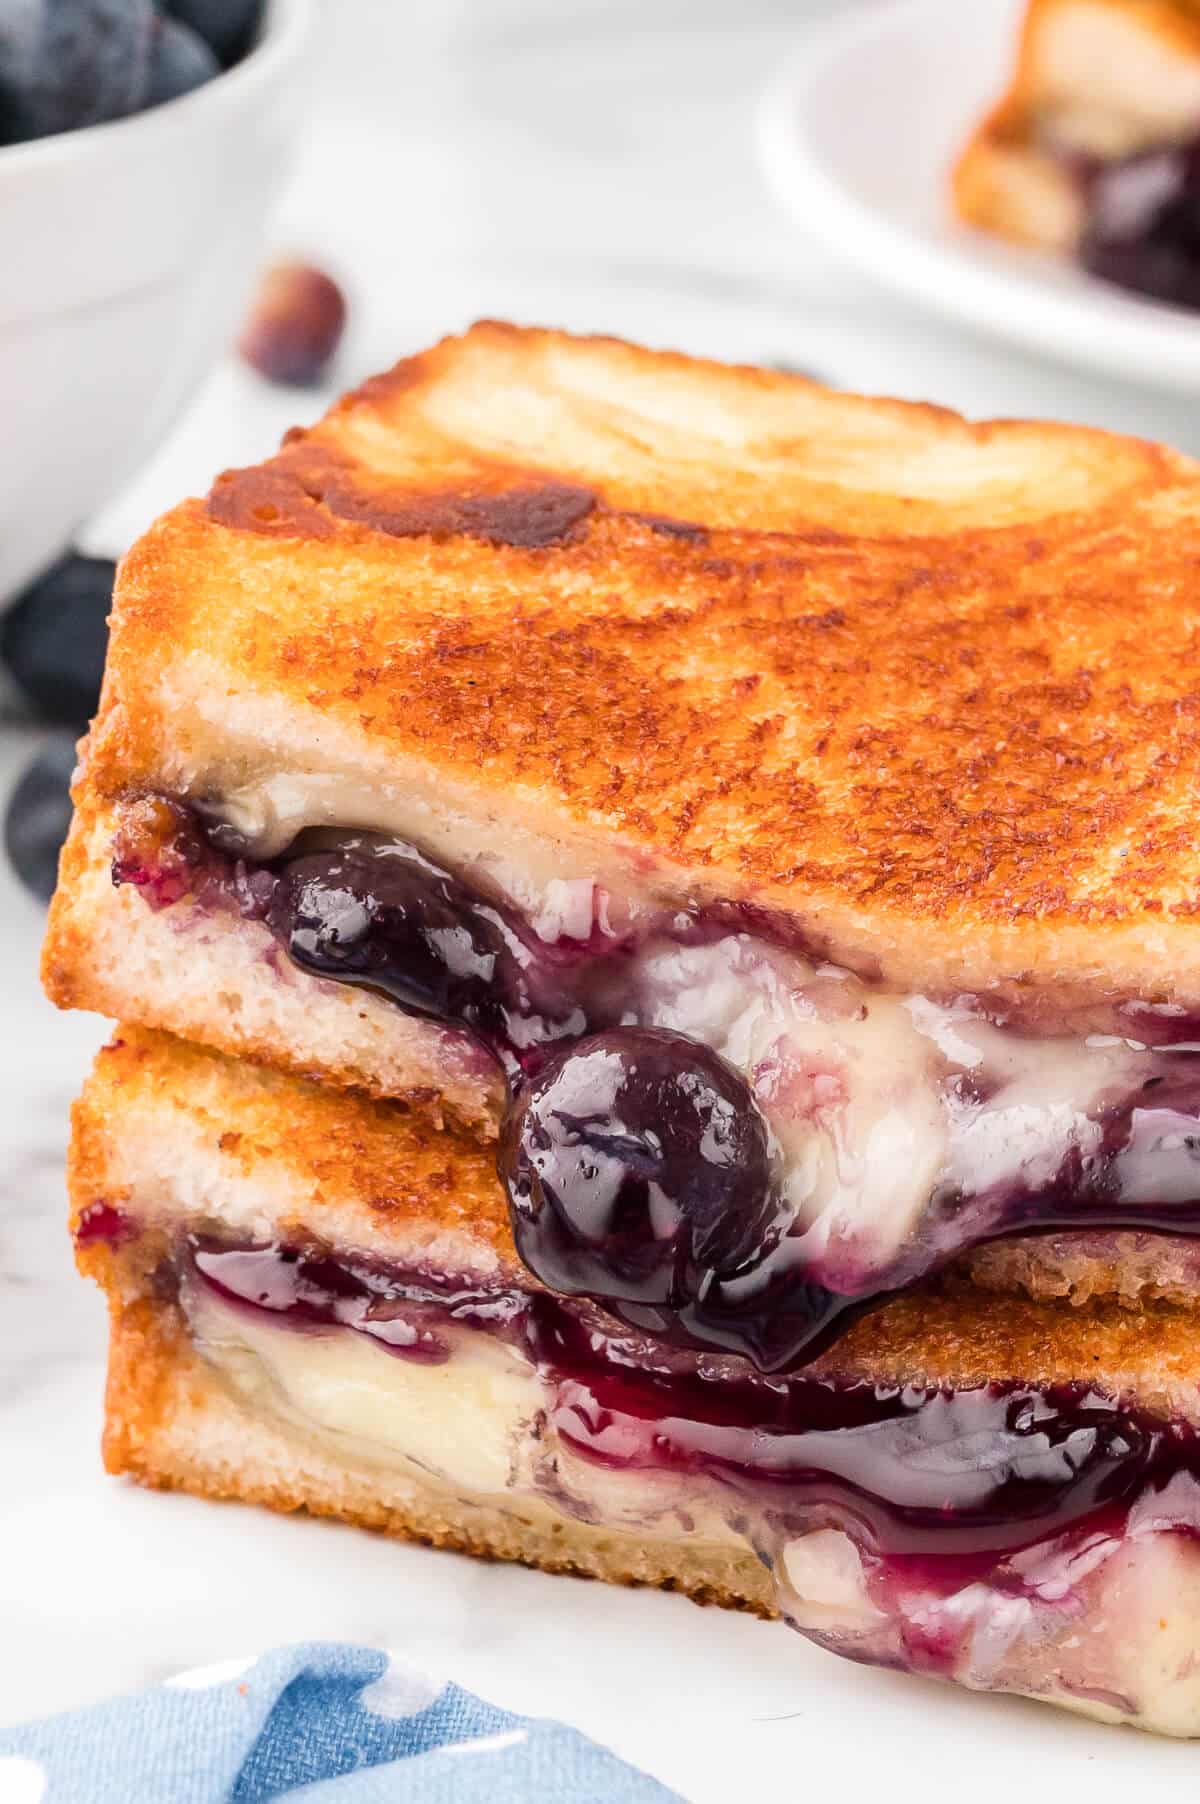 A blueberry brie grilled cheese on a plate.